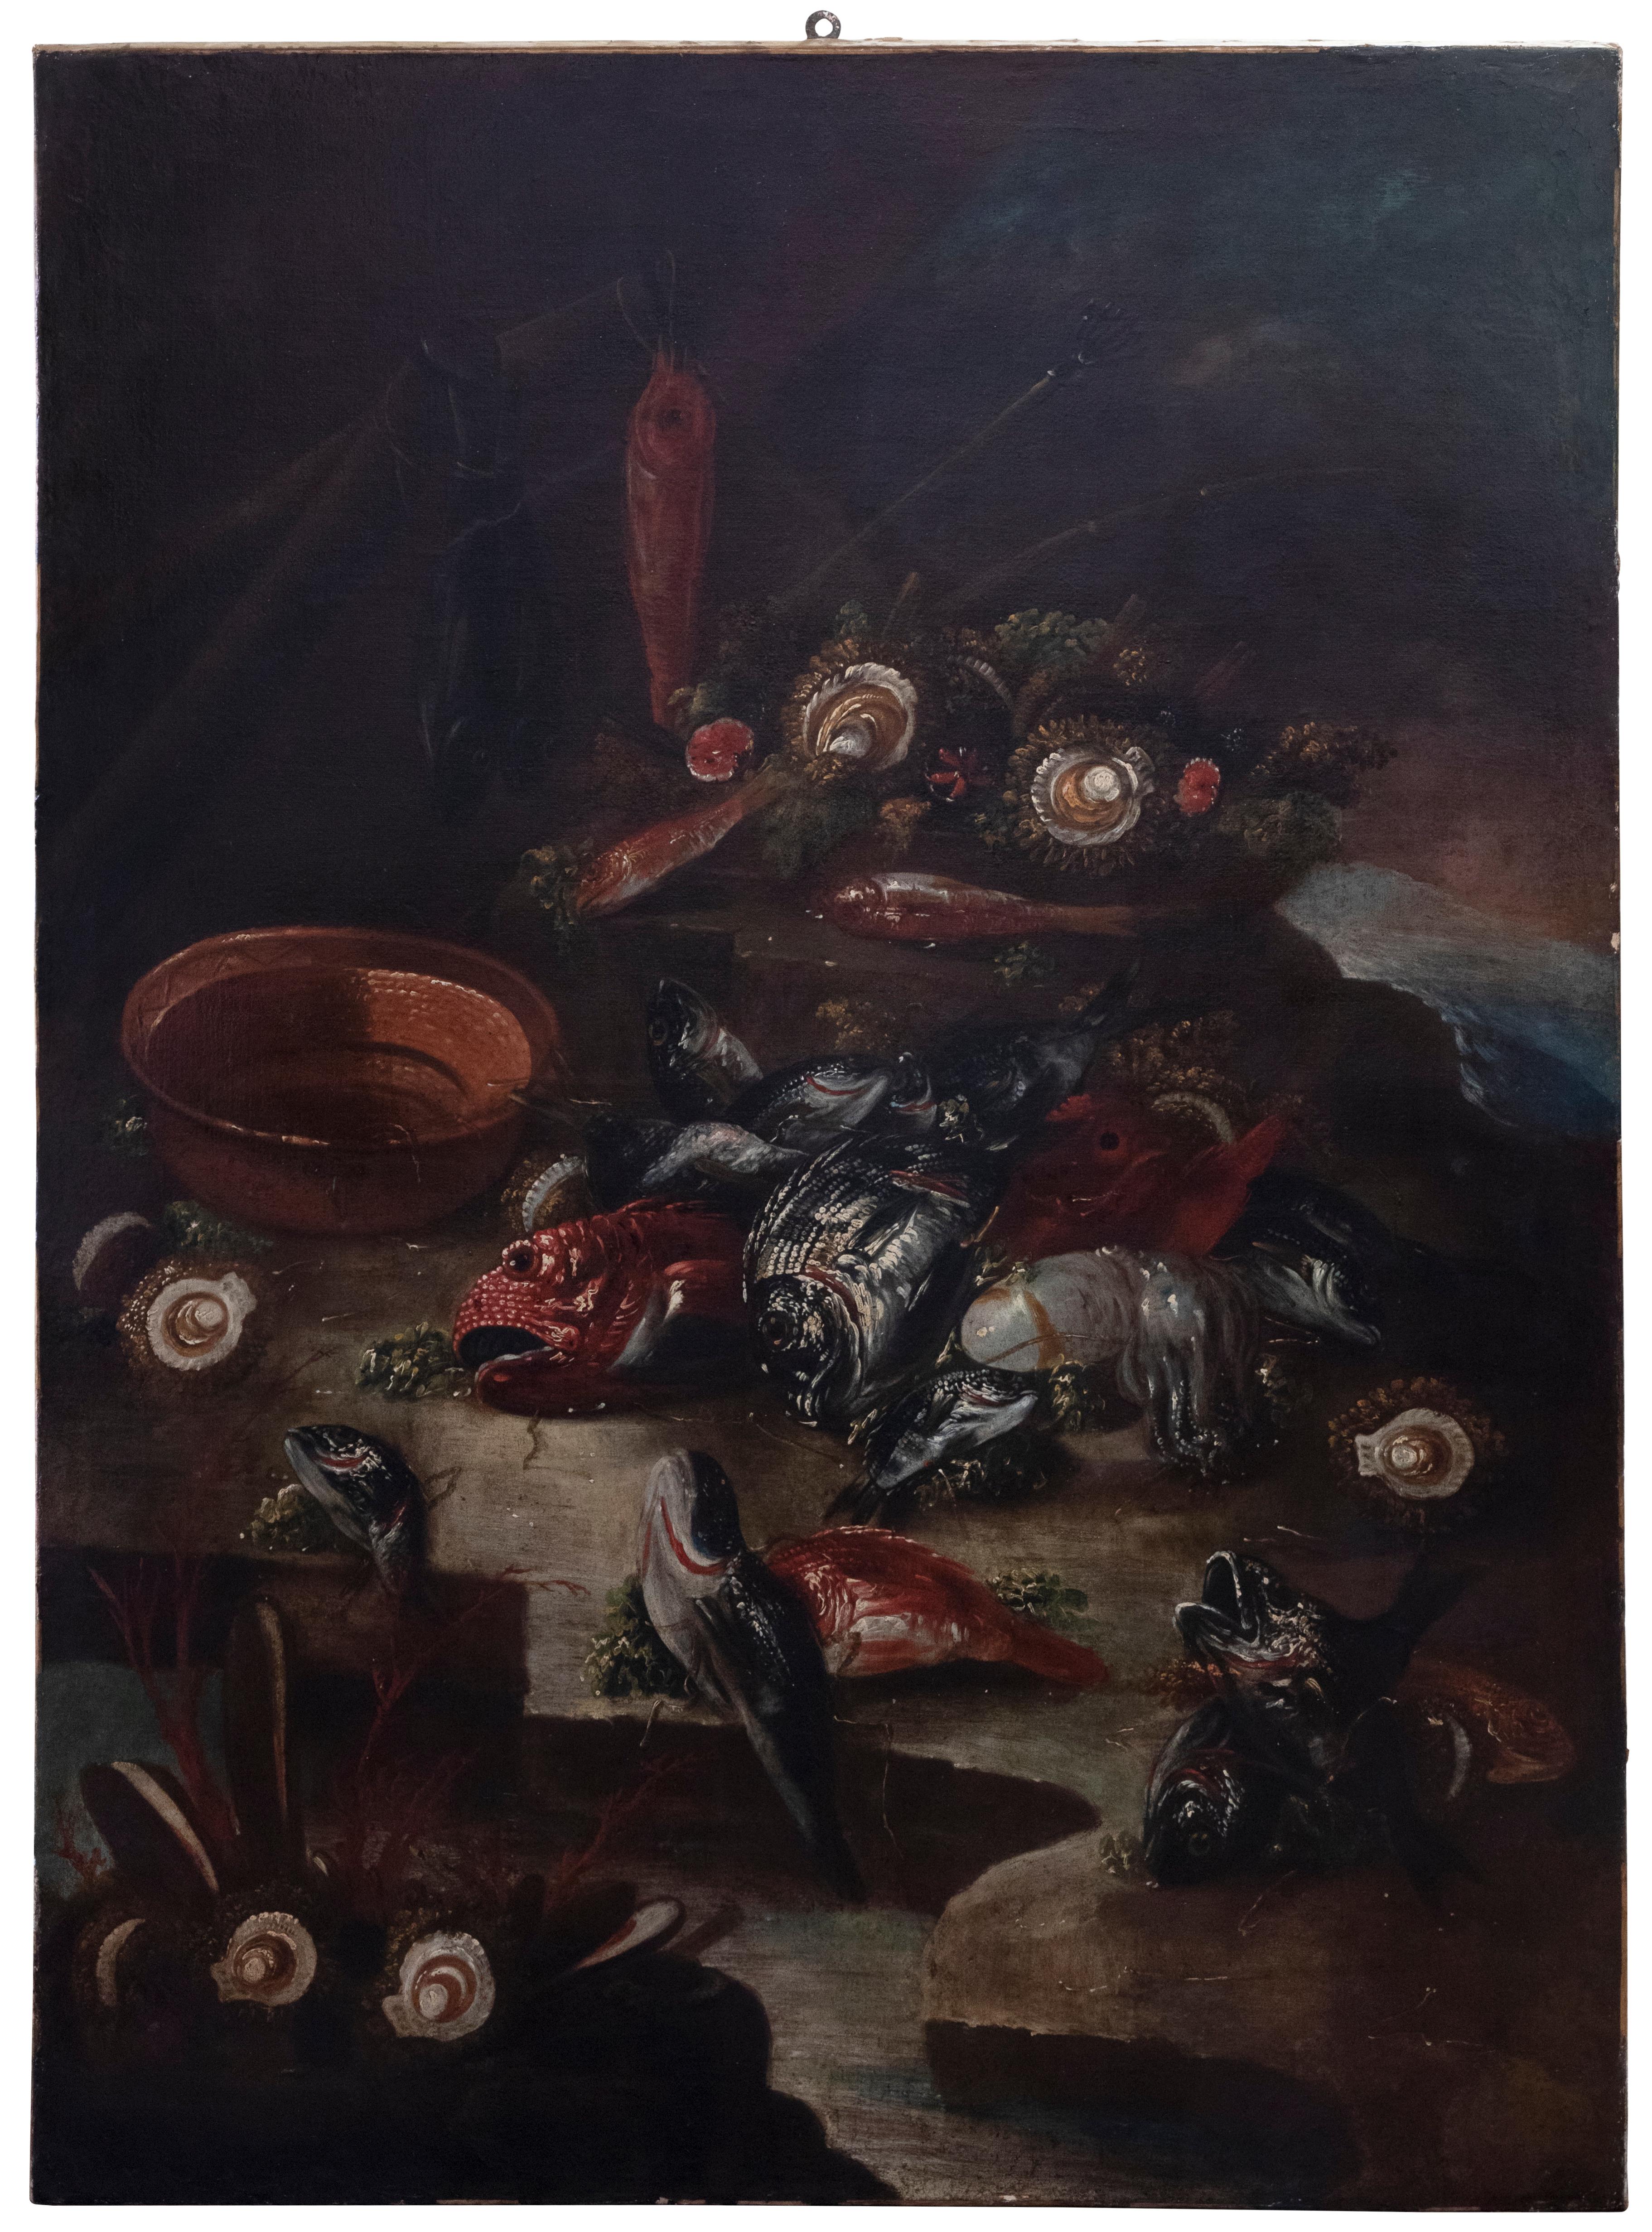 Still Life with Fishes and Oysters - Oil on Canvas - 17th Century